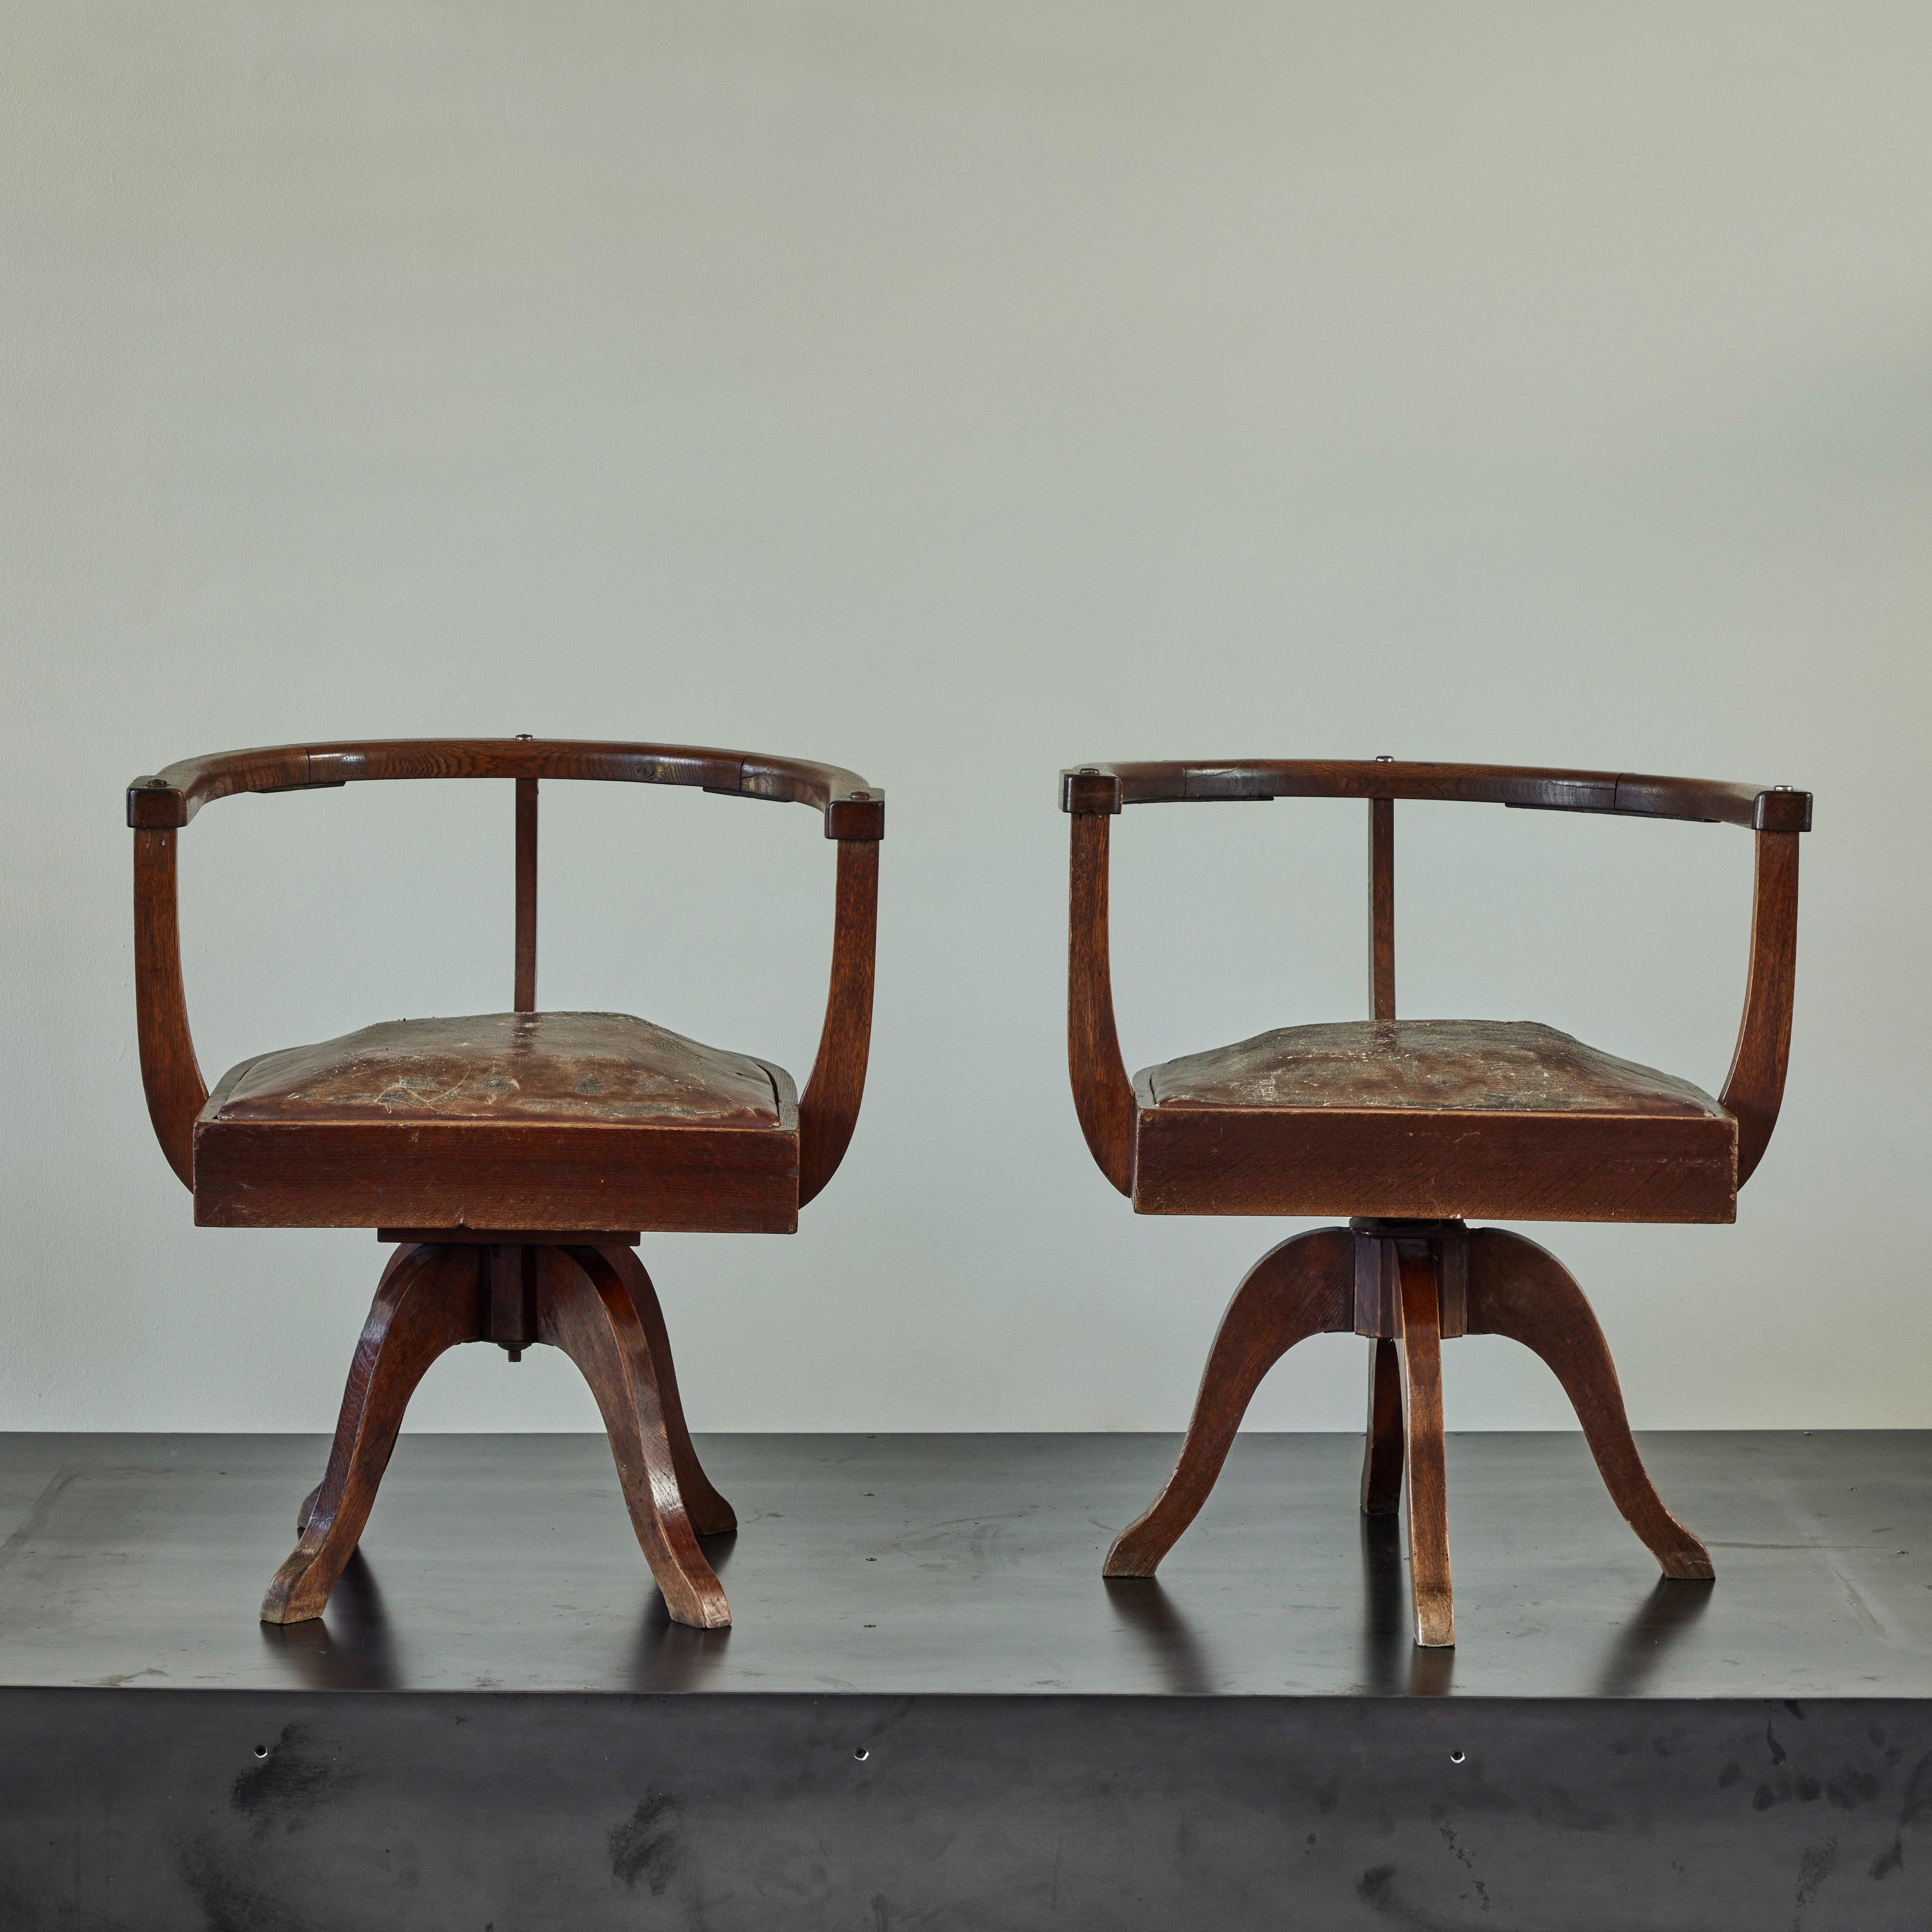 Sculptural study chairs from late 19th century England. With softly worn auburn leather drop-in seats and minimalist oak wood accents, these chairs have a refined, scholastic feel. 

England, circa 1880

Dimensions: 25W x 22D x 27.5H (seat